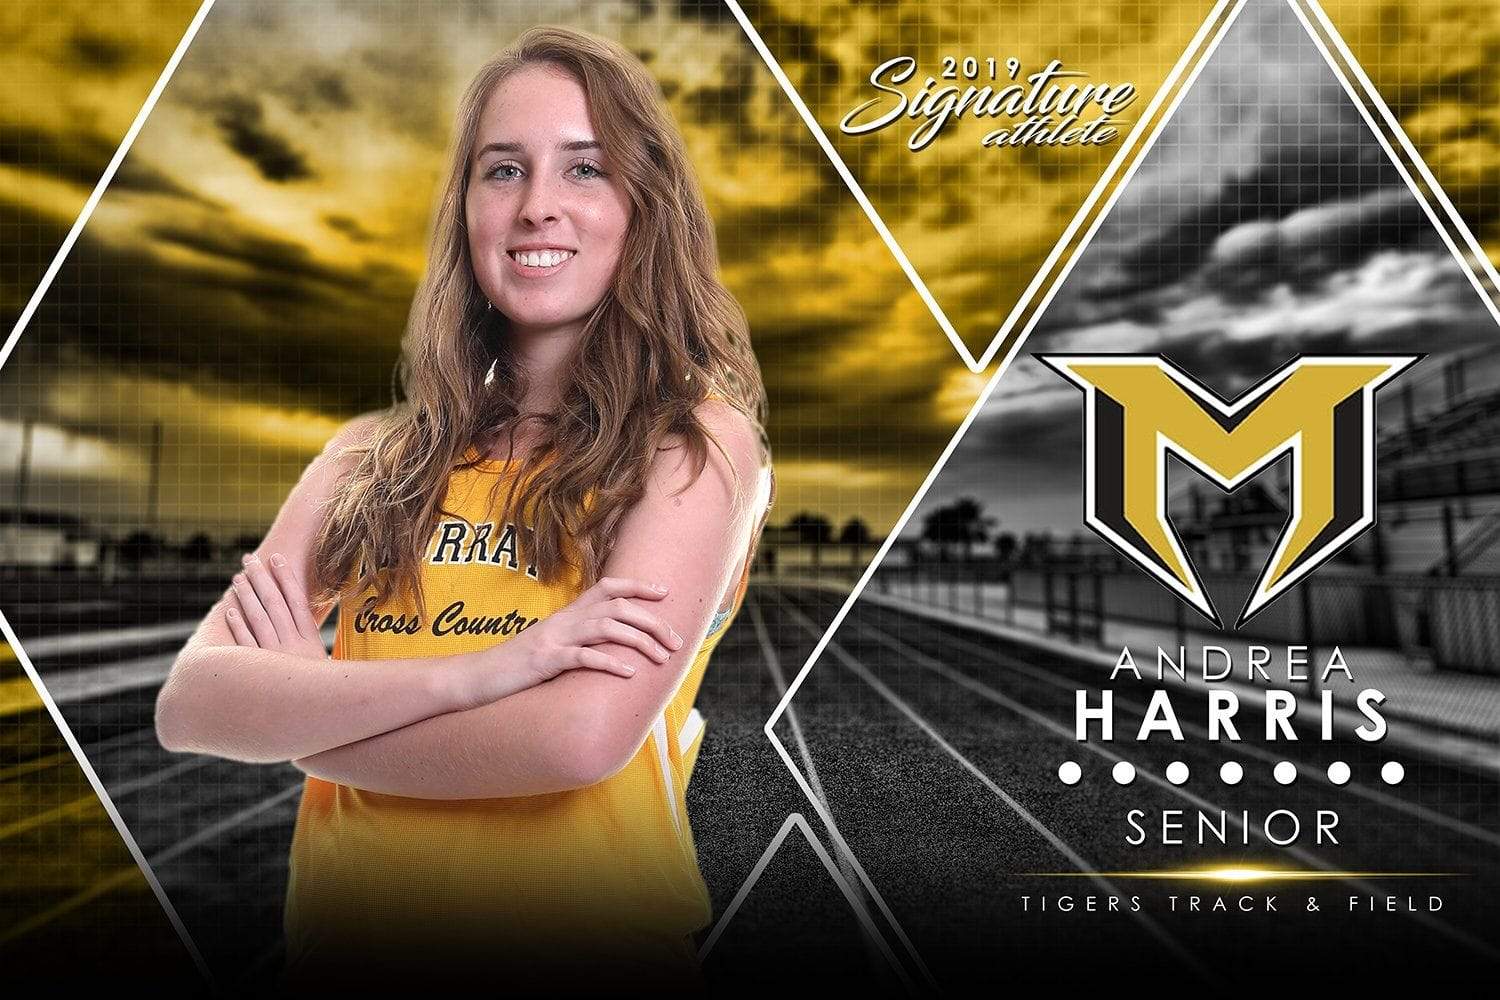 Track & Field - v.2 - Signature Player - H Poster/Banner-Photoshop Template - Photo Solutions